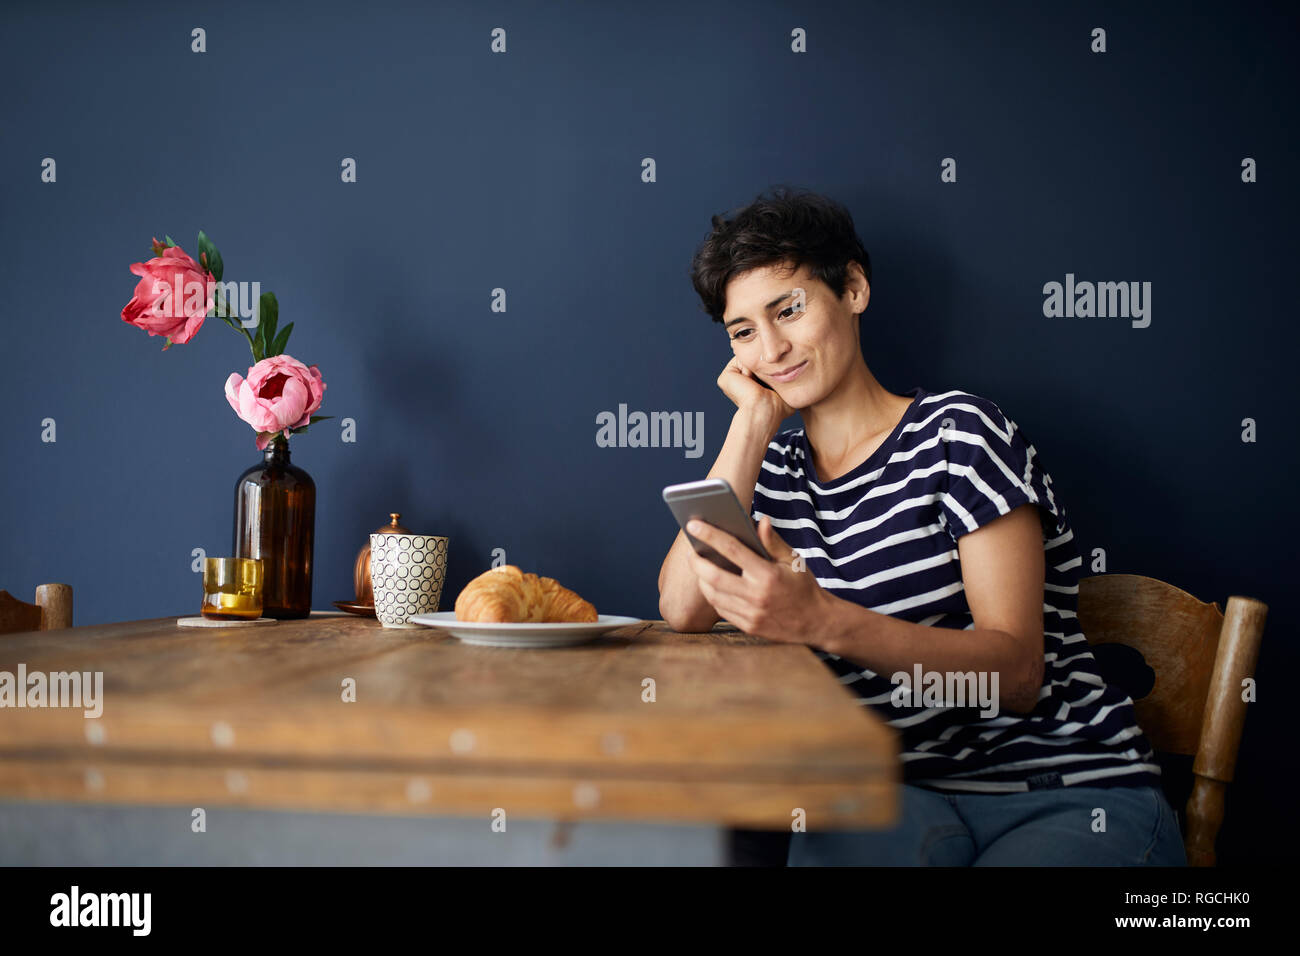 Smiling woman at home sitting at wooden table checking cell phone Stock Photo